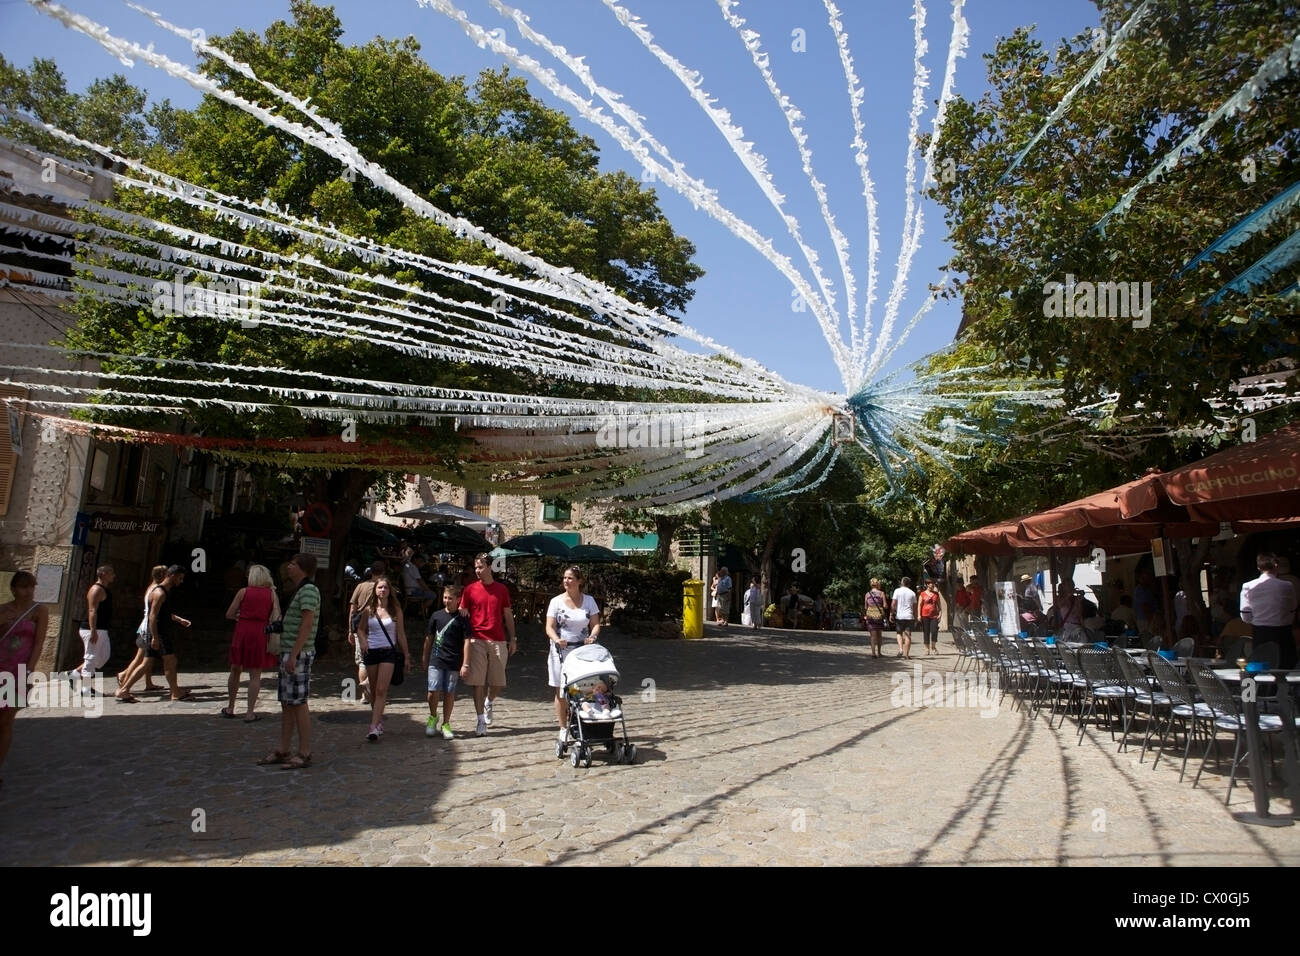 Bunting hanging in the streets of Valdemossa Mallorca (Majorca) for a festival. Stock Photo